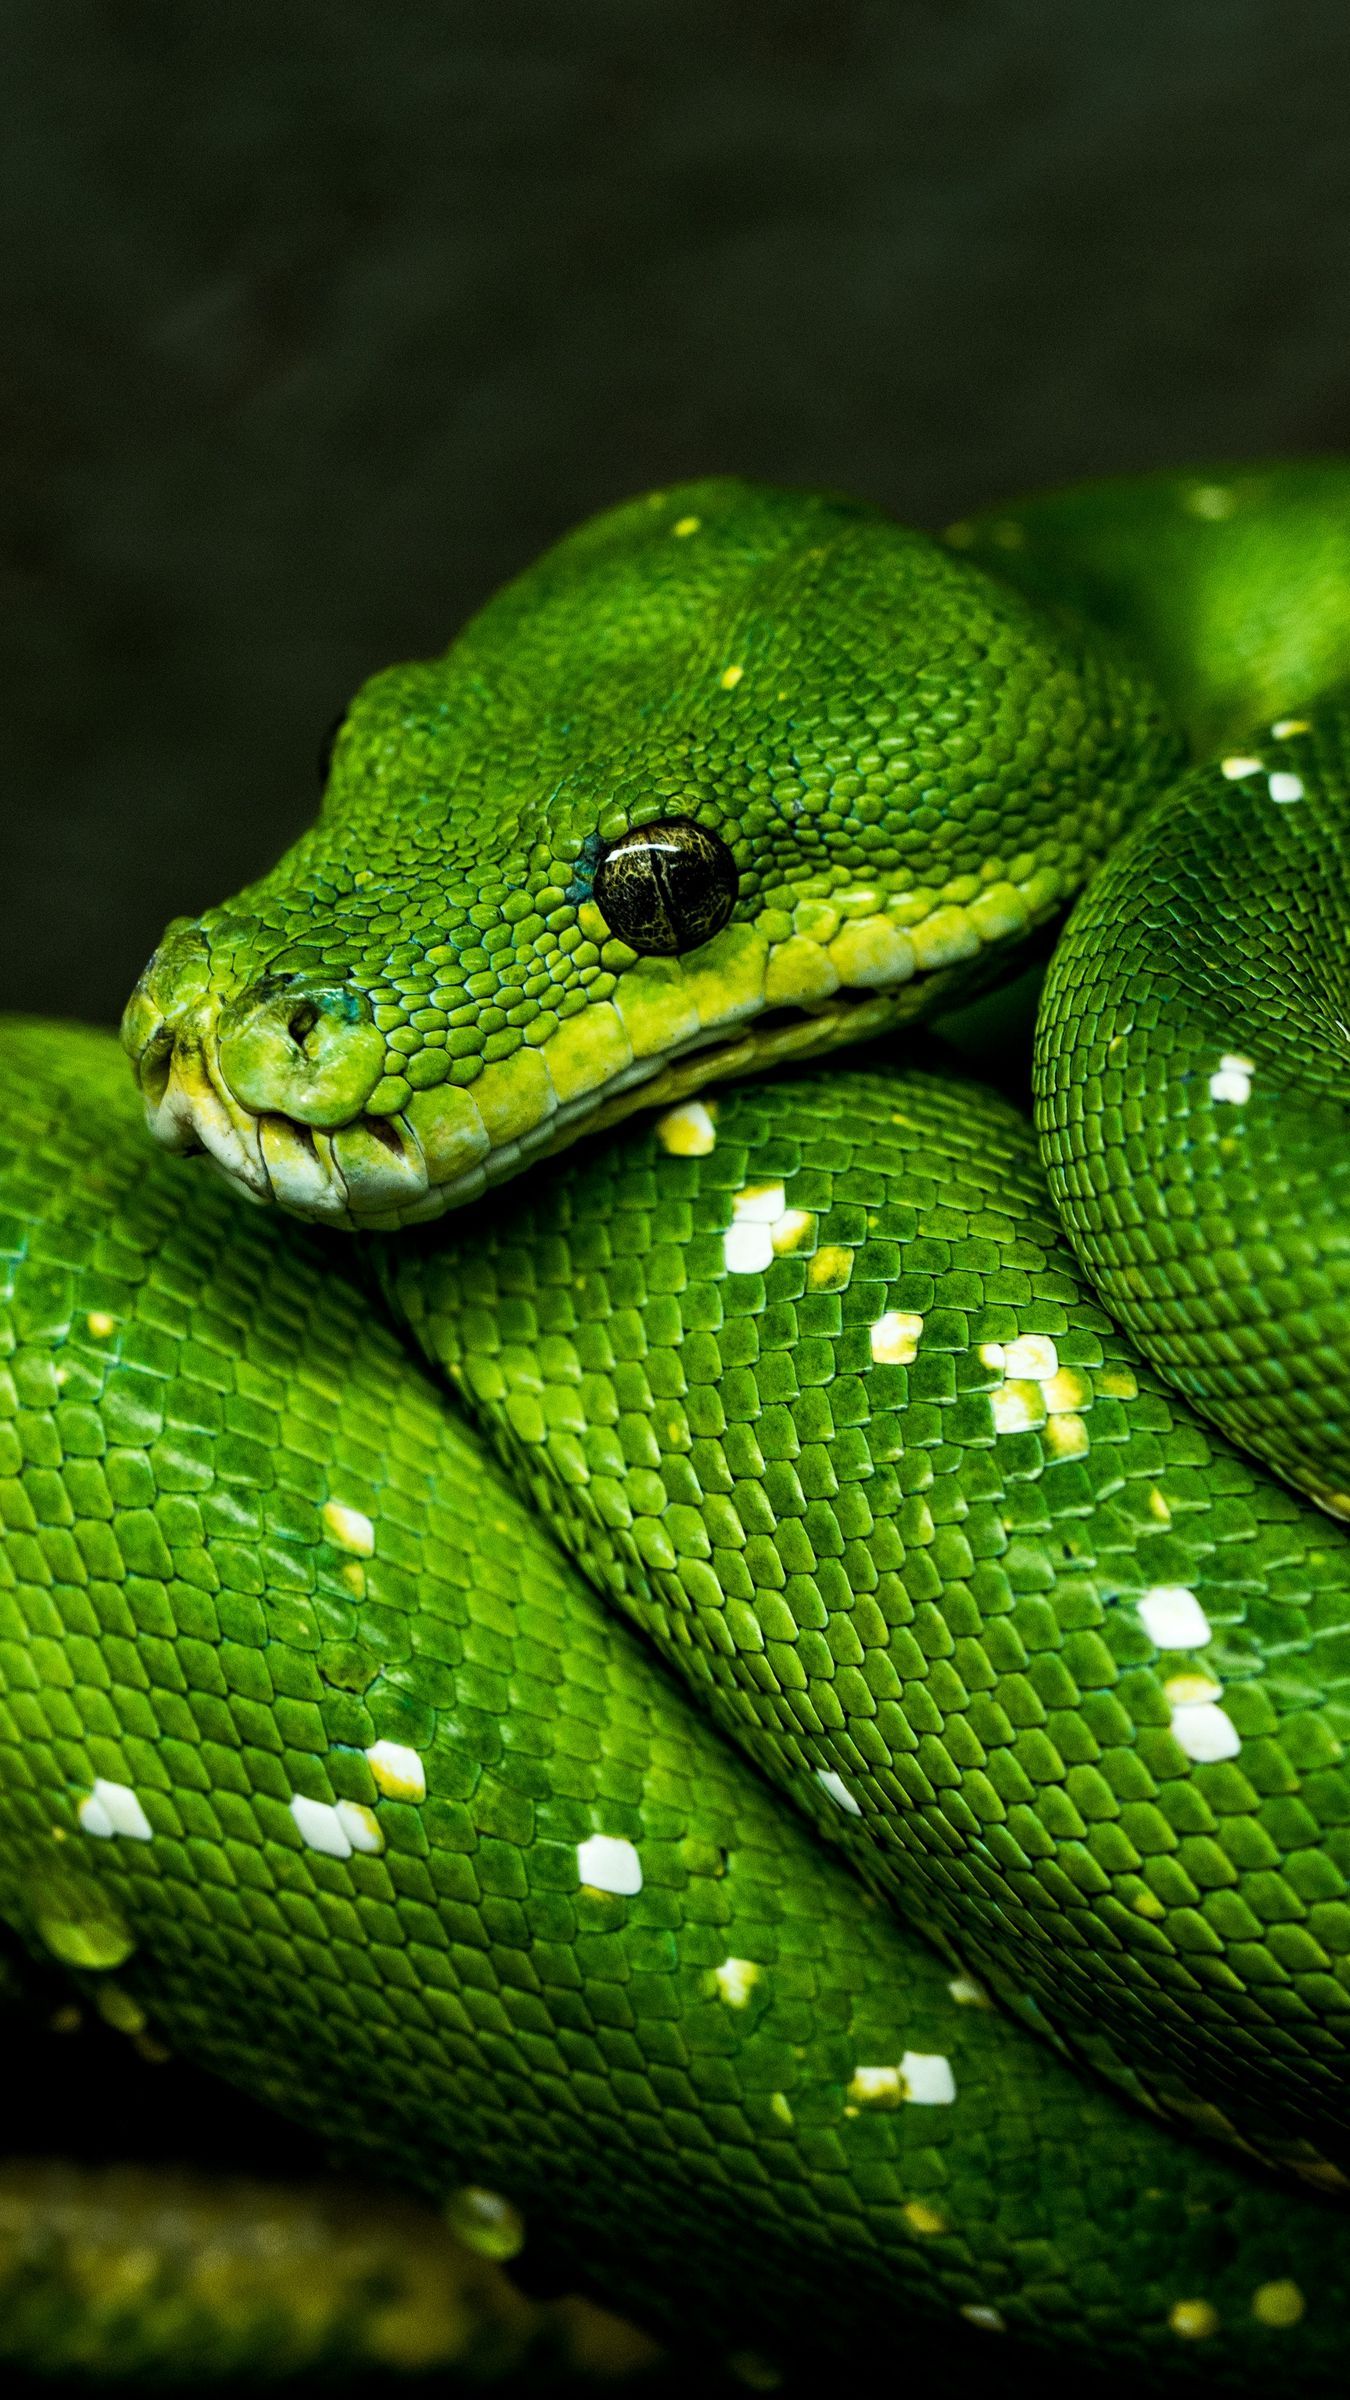 Download wallpaper 1350x2400 snake, green, reptile, wildlife iphone 8+/7+/6s+/for parallax HD background